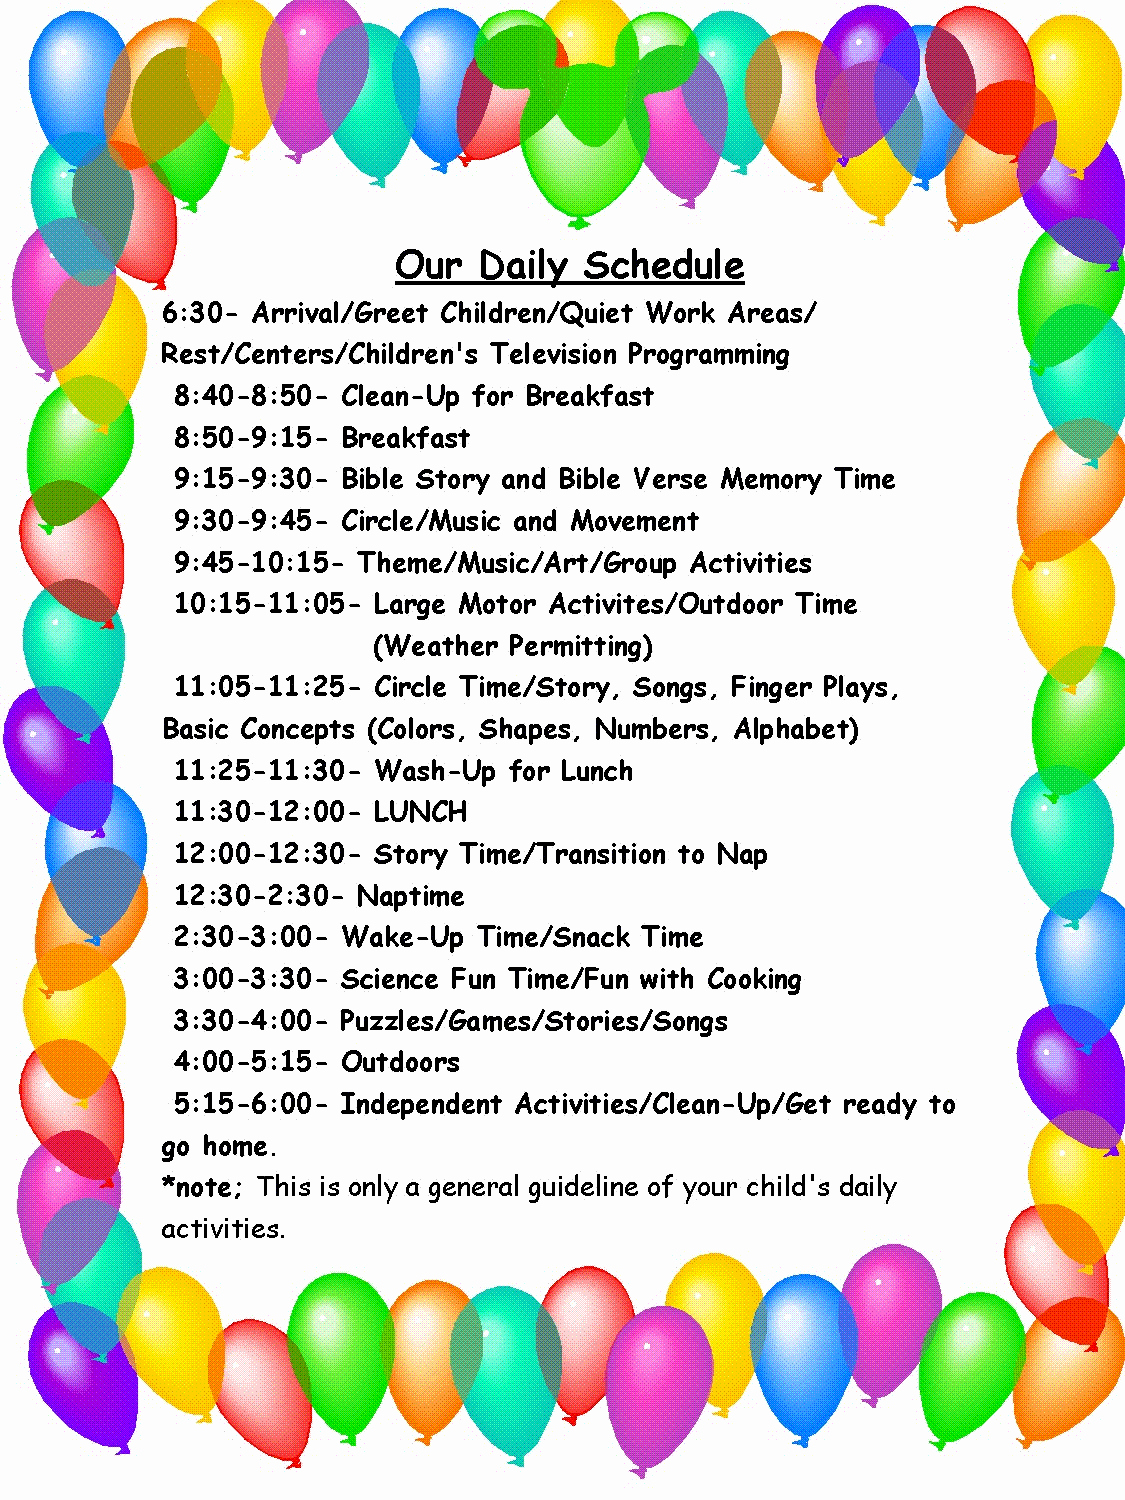 Daycare Staff Schedule Template Best Of Day Care Logos Daily Schedule Marcy S Shining Stars In Home Childcare